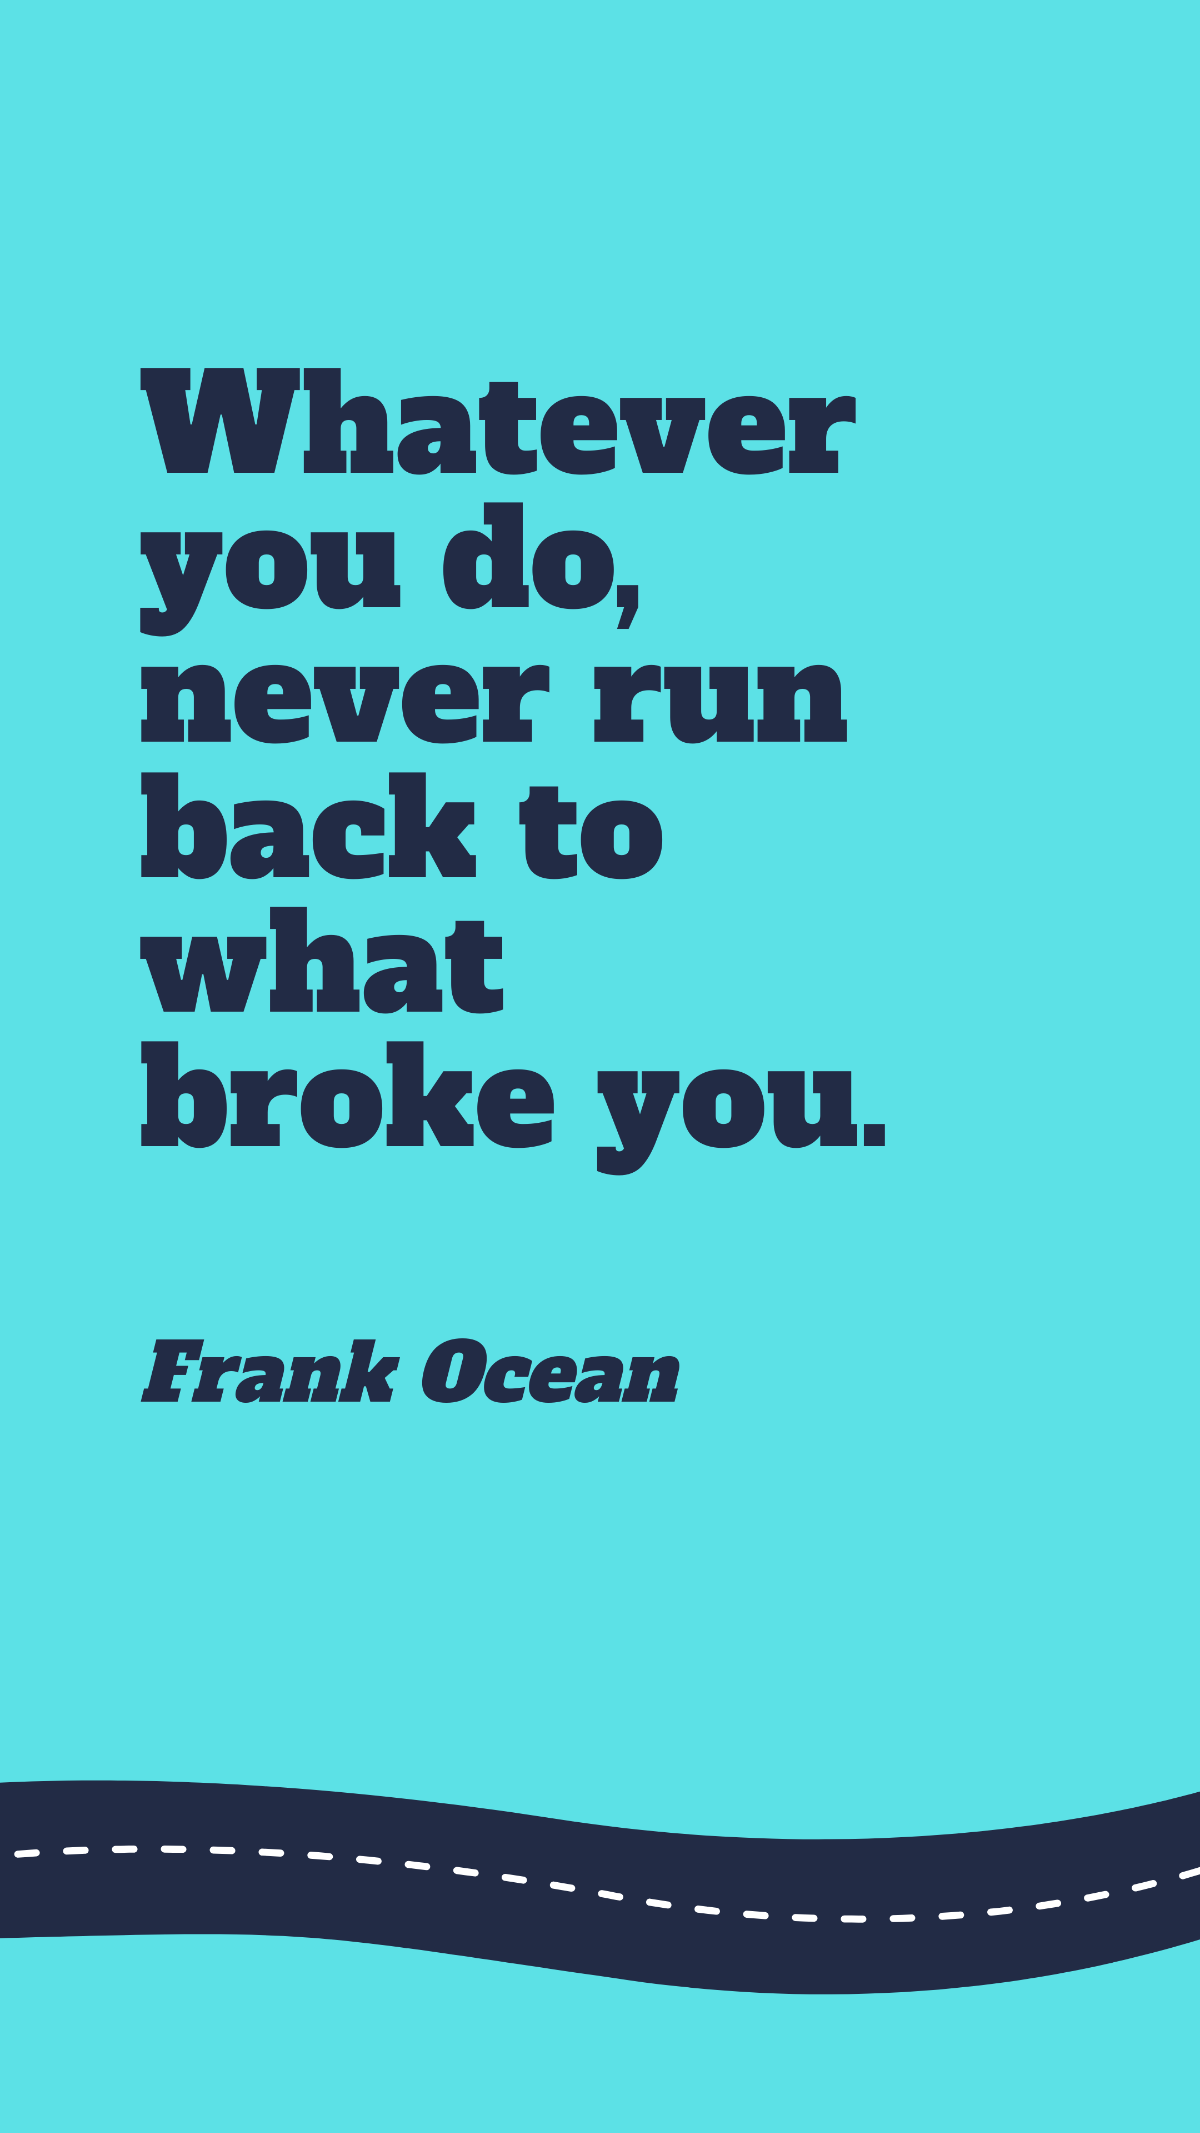 Frank Ocean - Whatever you do, never run back to what broke you. Template